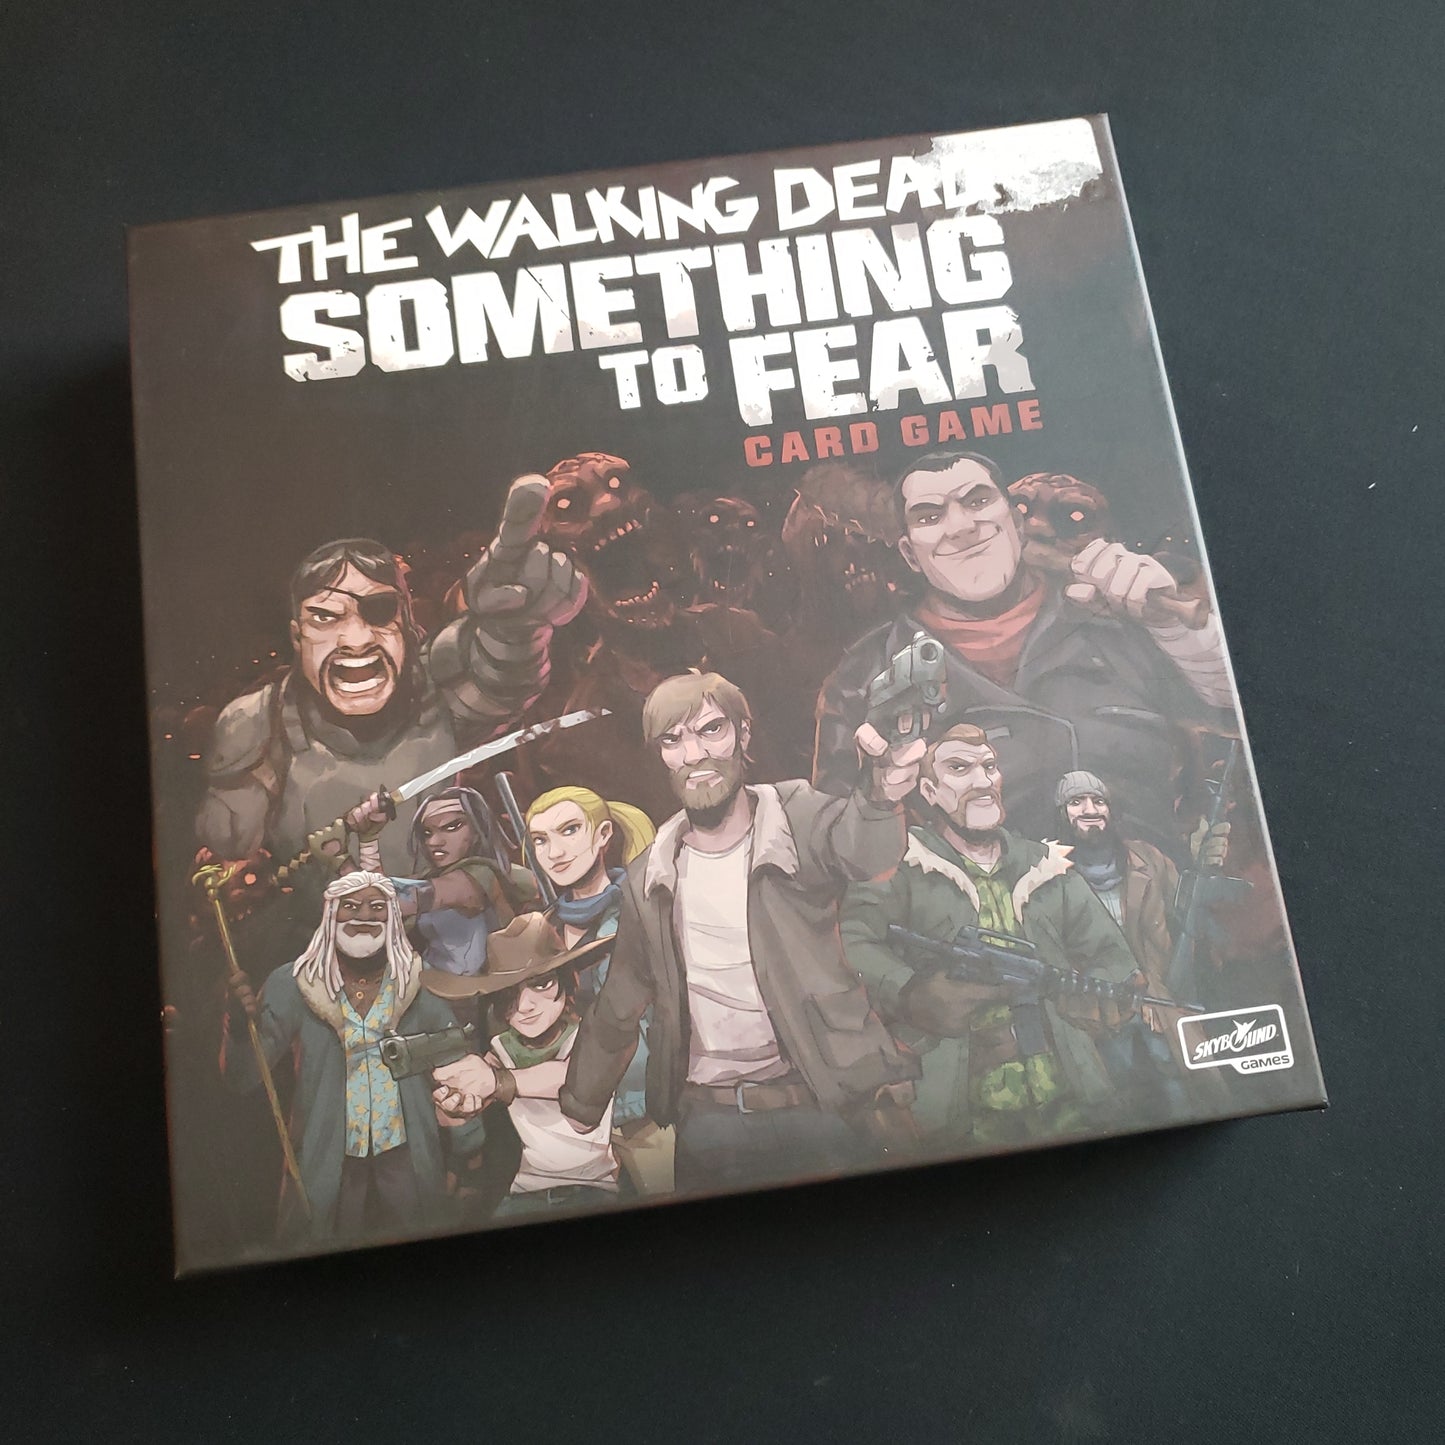 Image shows the front cover of the box of the Walking Dead: Something to Fear card game